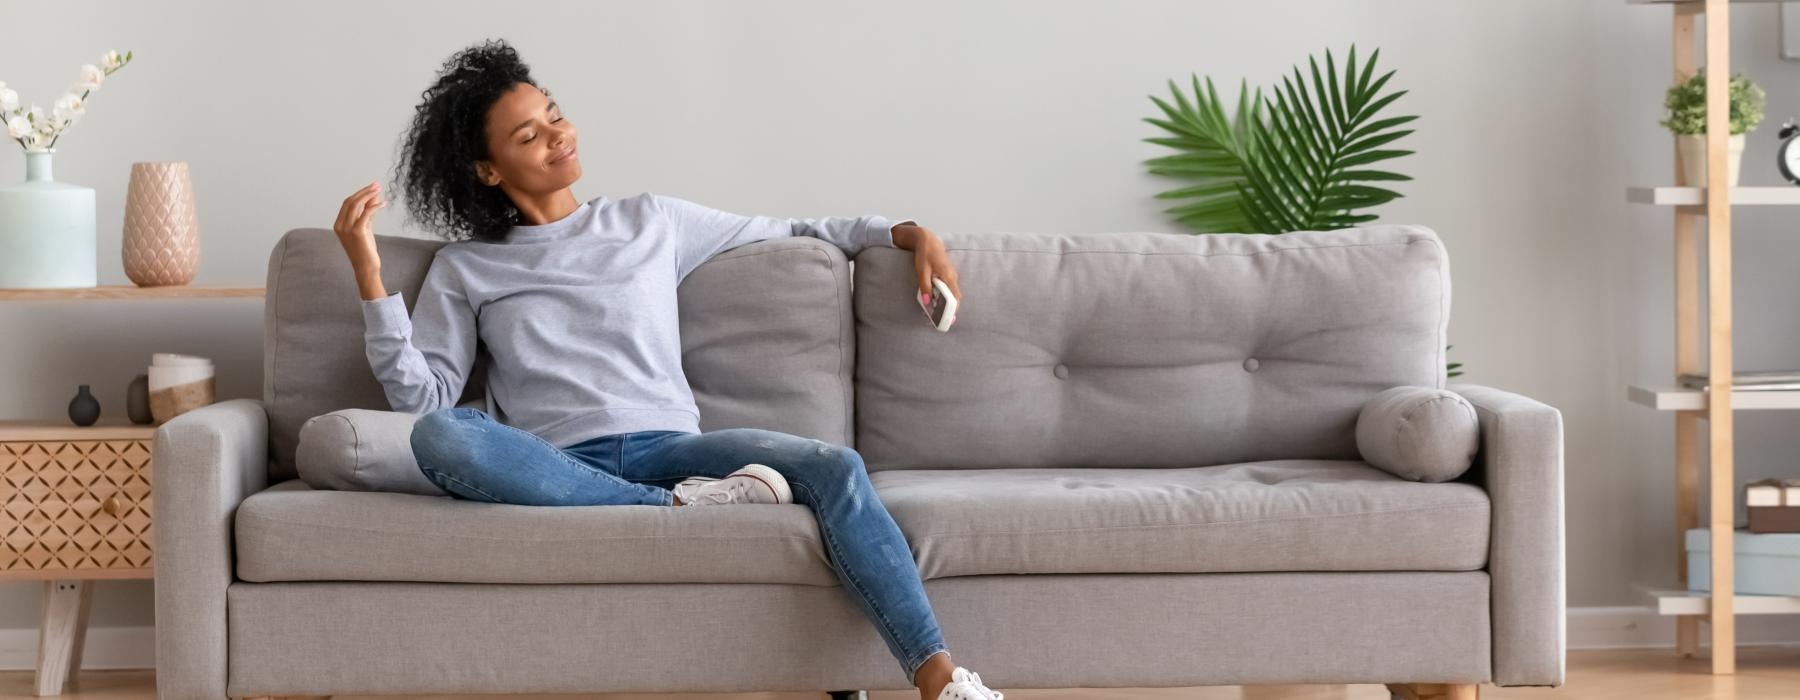 a person sitting on a couch